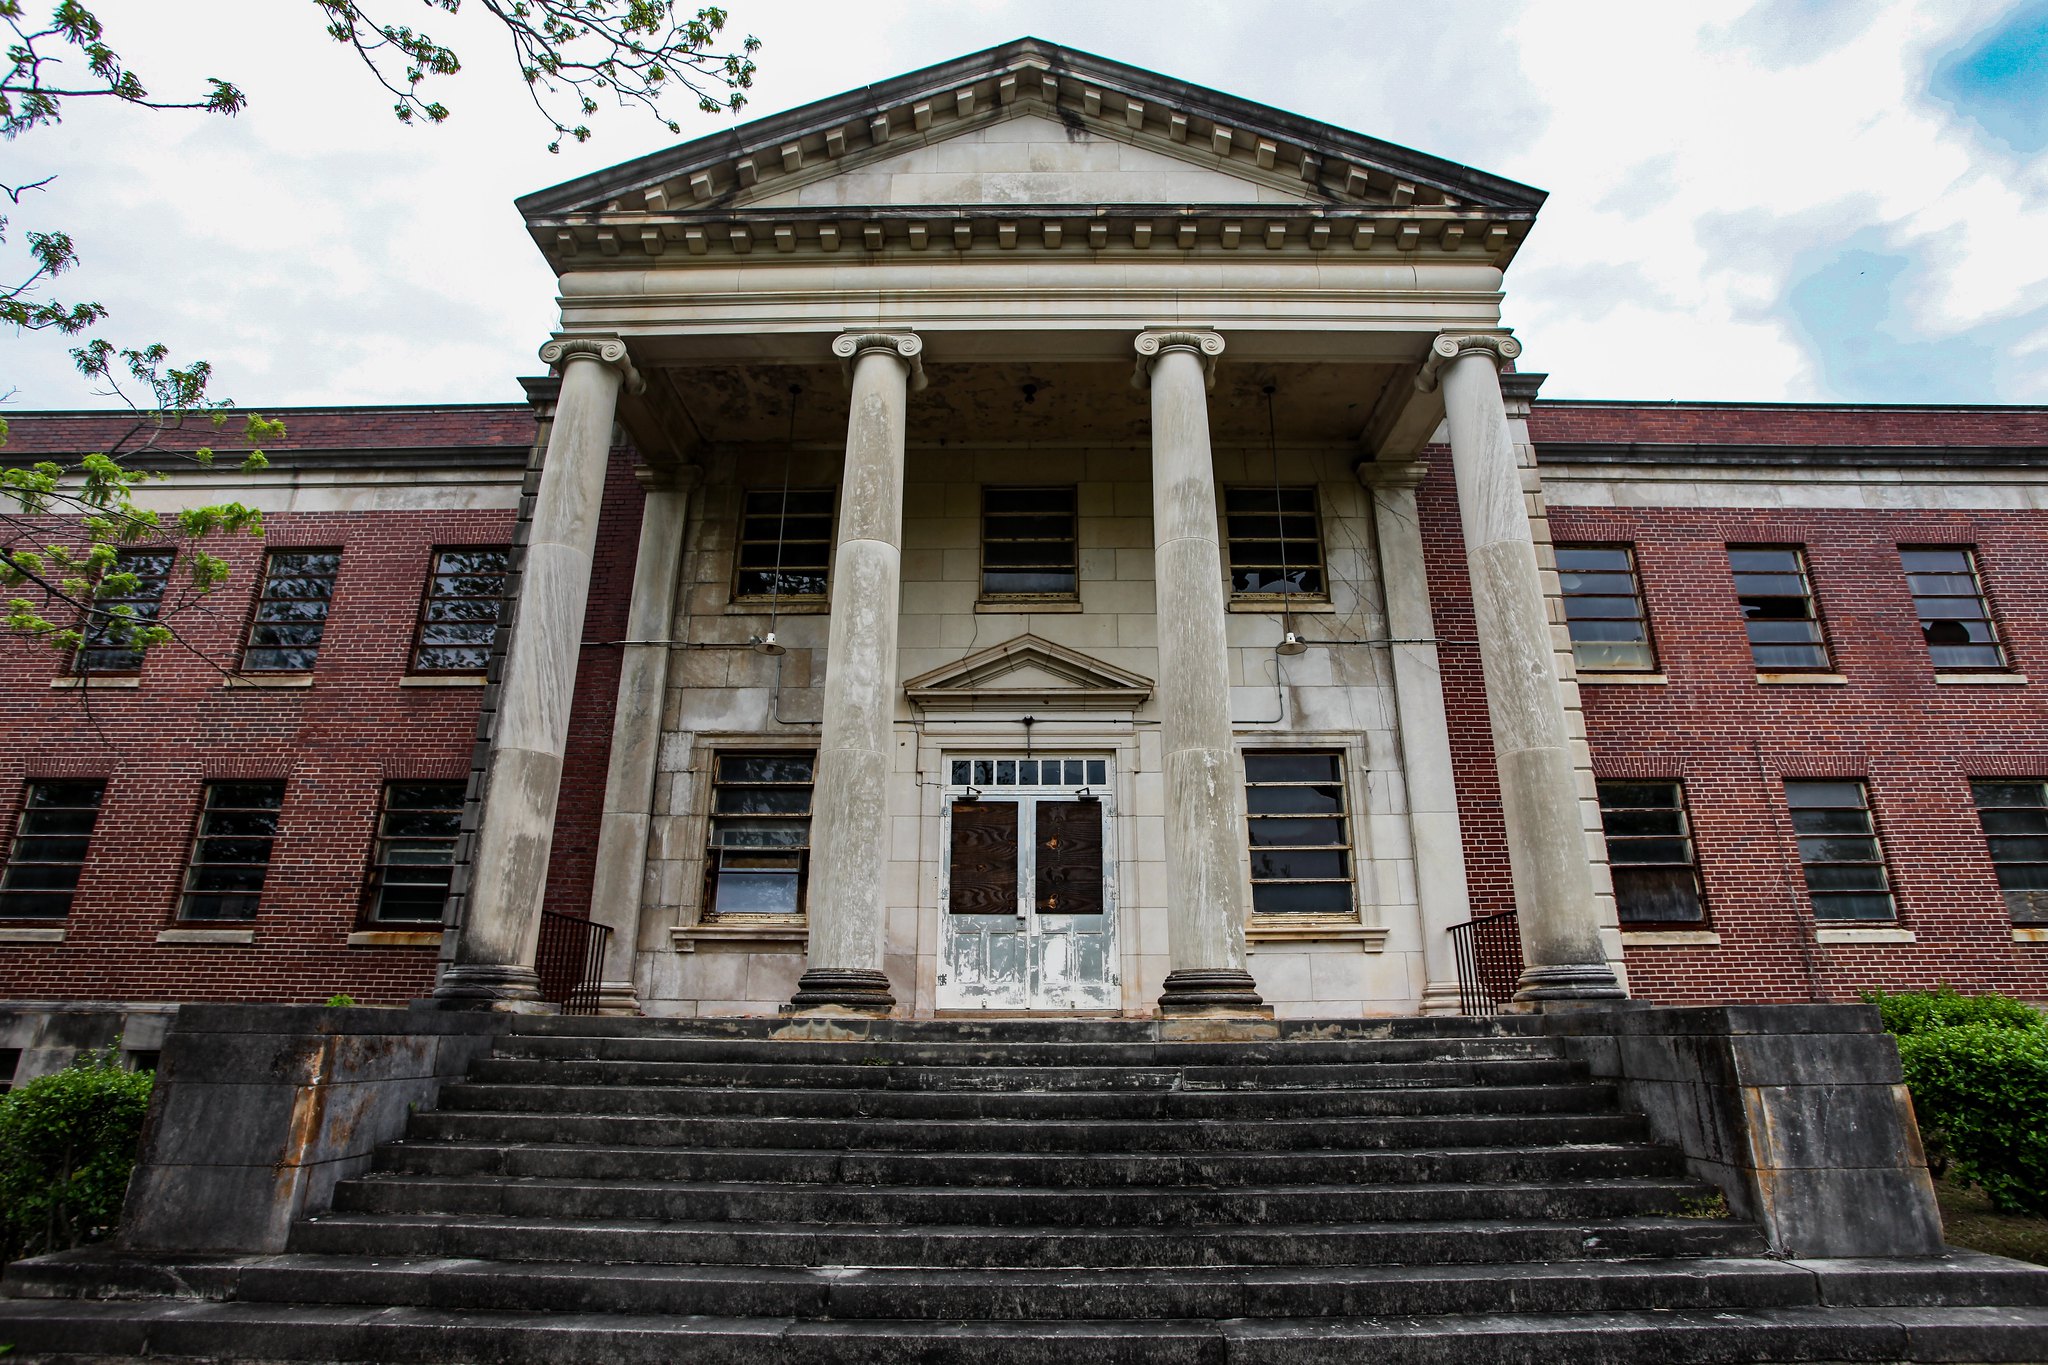 Central State Hospital